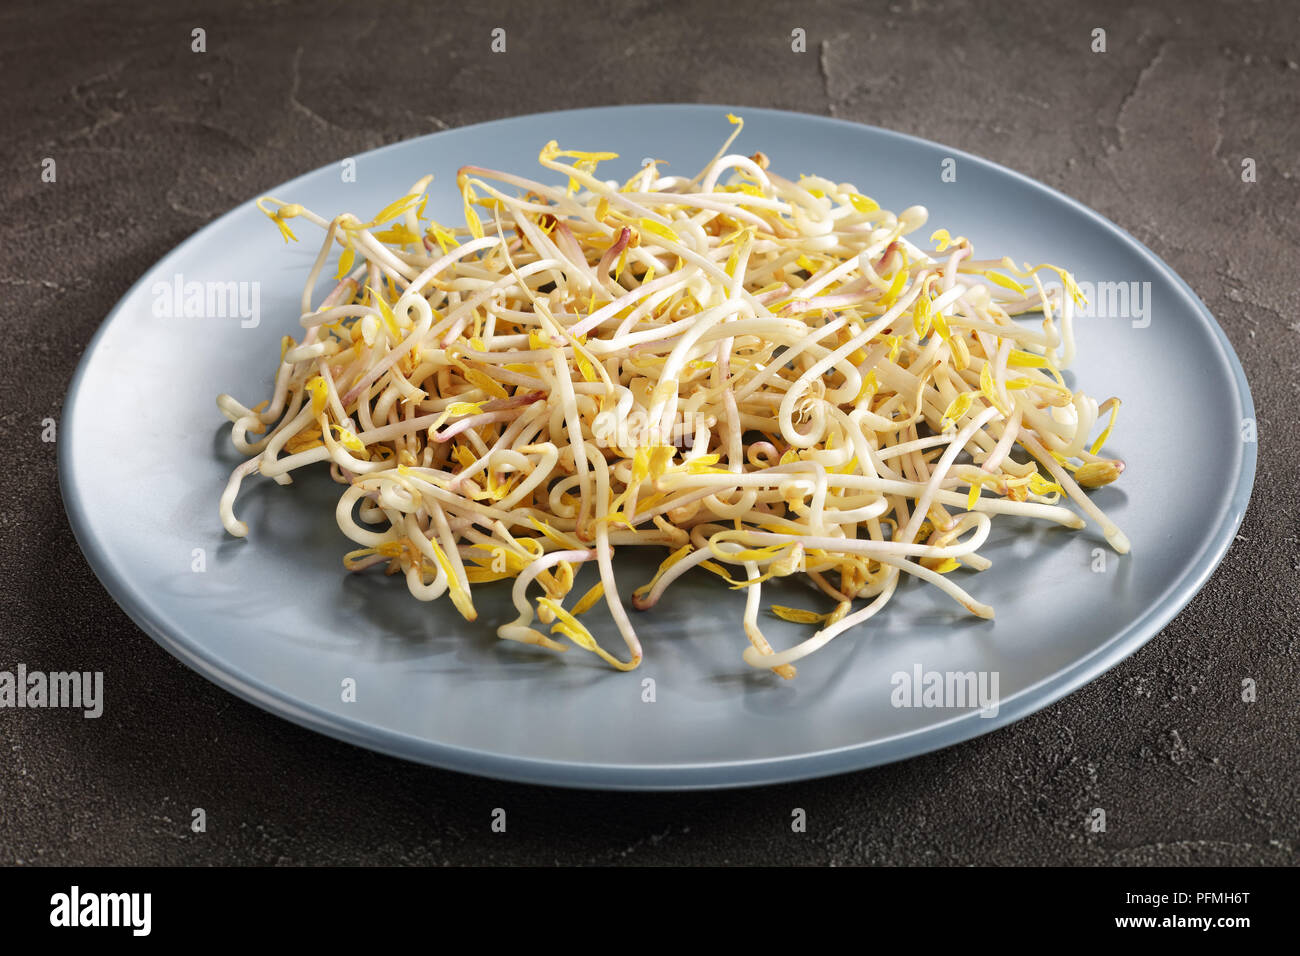 freshly grown mung Bean Sprouts on plate on concrete background, major ingredient of asian cuisine, healthy life concept, view form above, close-up Stock Photo